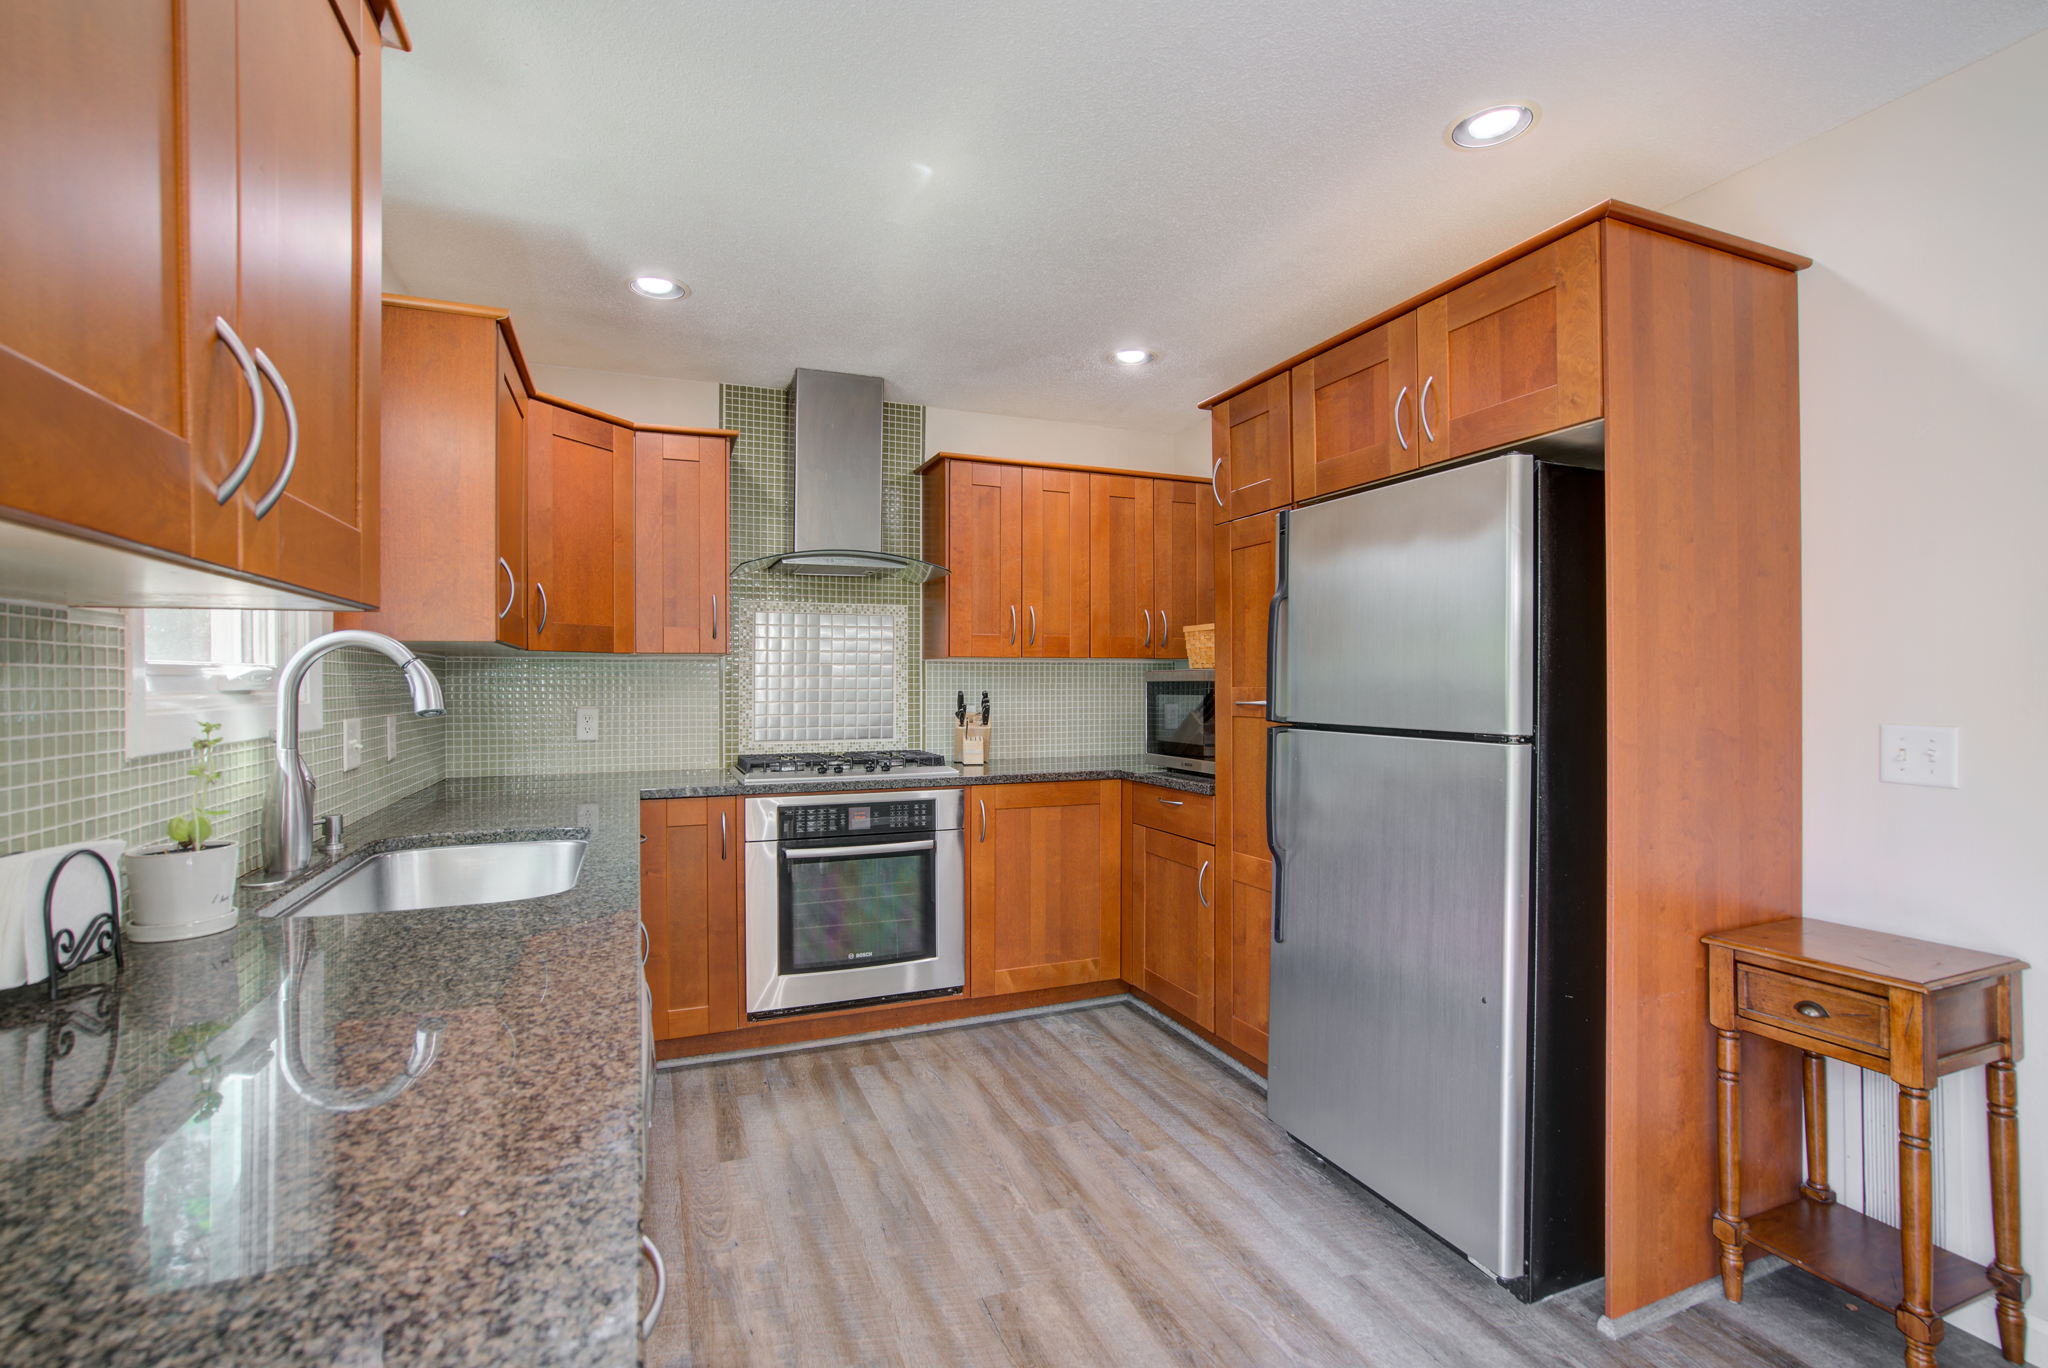 Stainless appliances and beautiful cabinetry